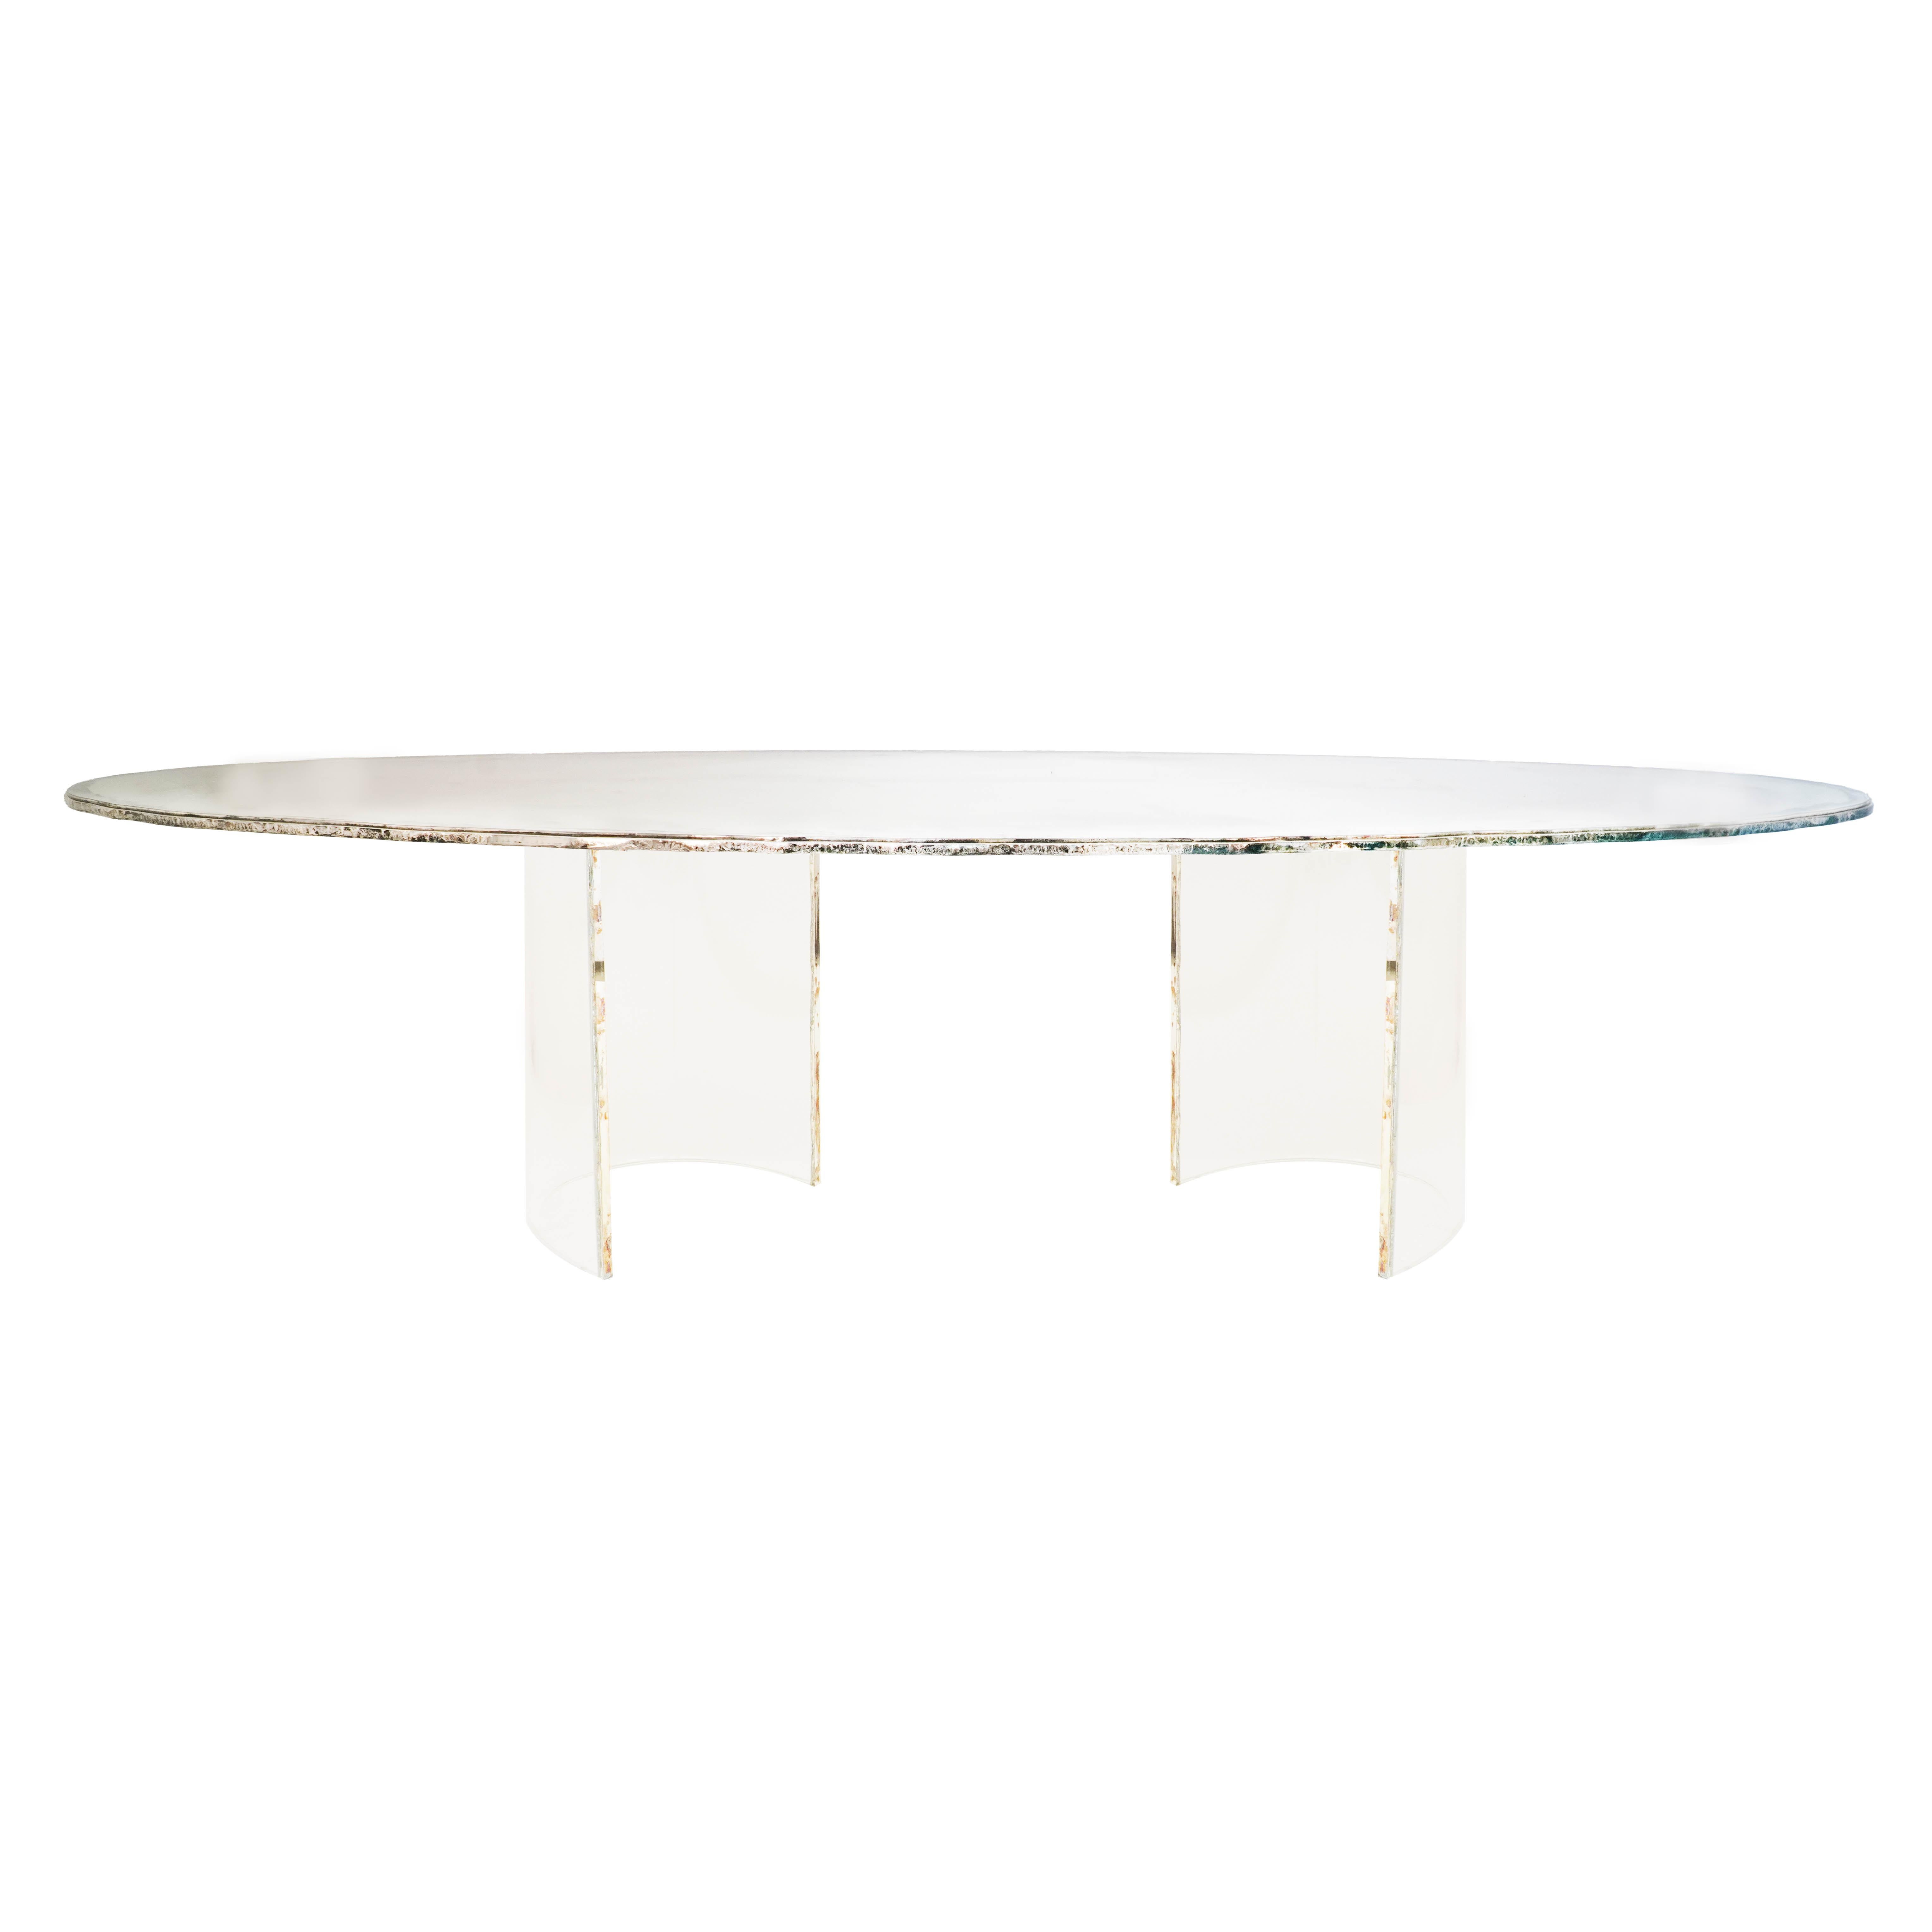 GEM Dining - coffee tables 

Combining contemporary modern style with details inspired by our glass tradition, Sabrina Landini GEM tables reinterpret our legendary links into head-turning design accents

The table, reminiscent of a gem hugged by its